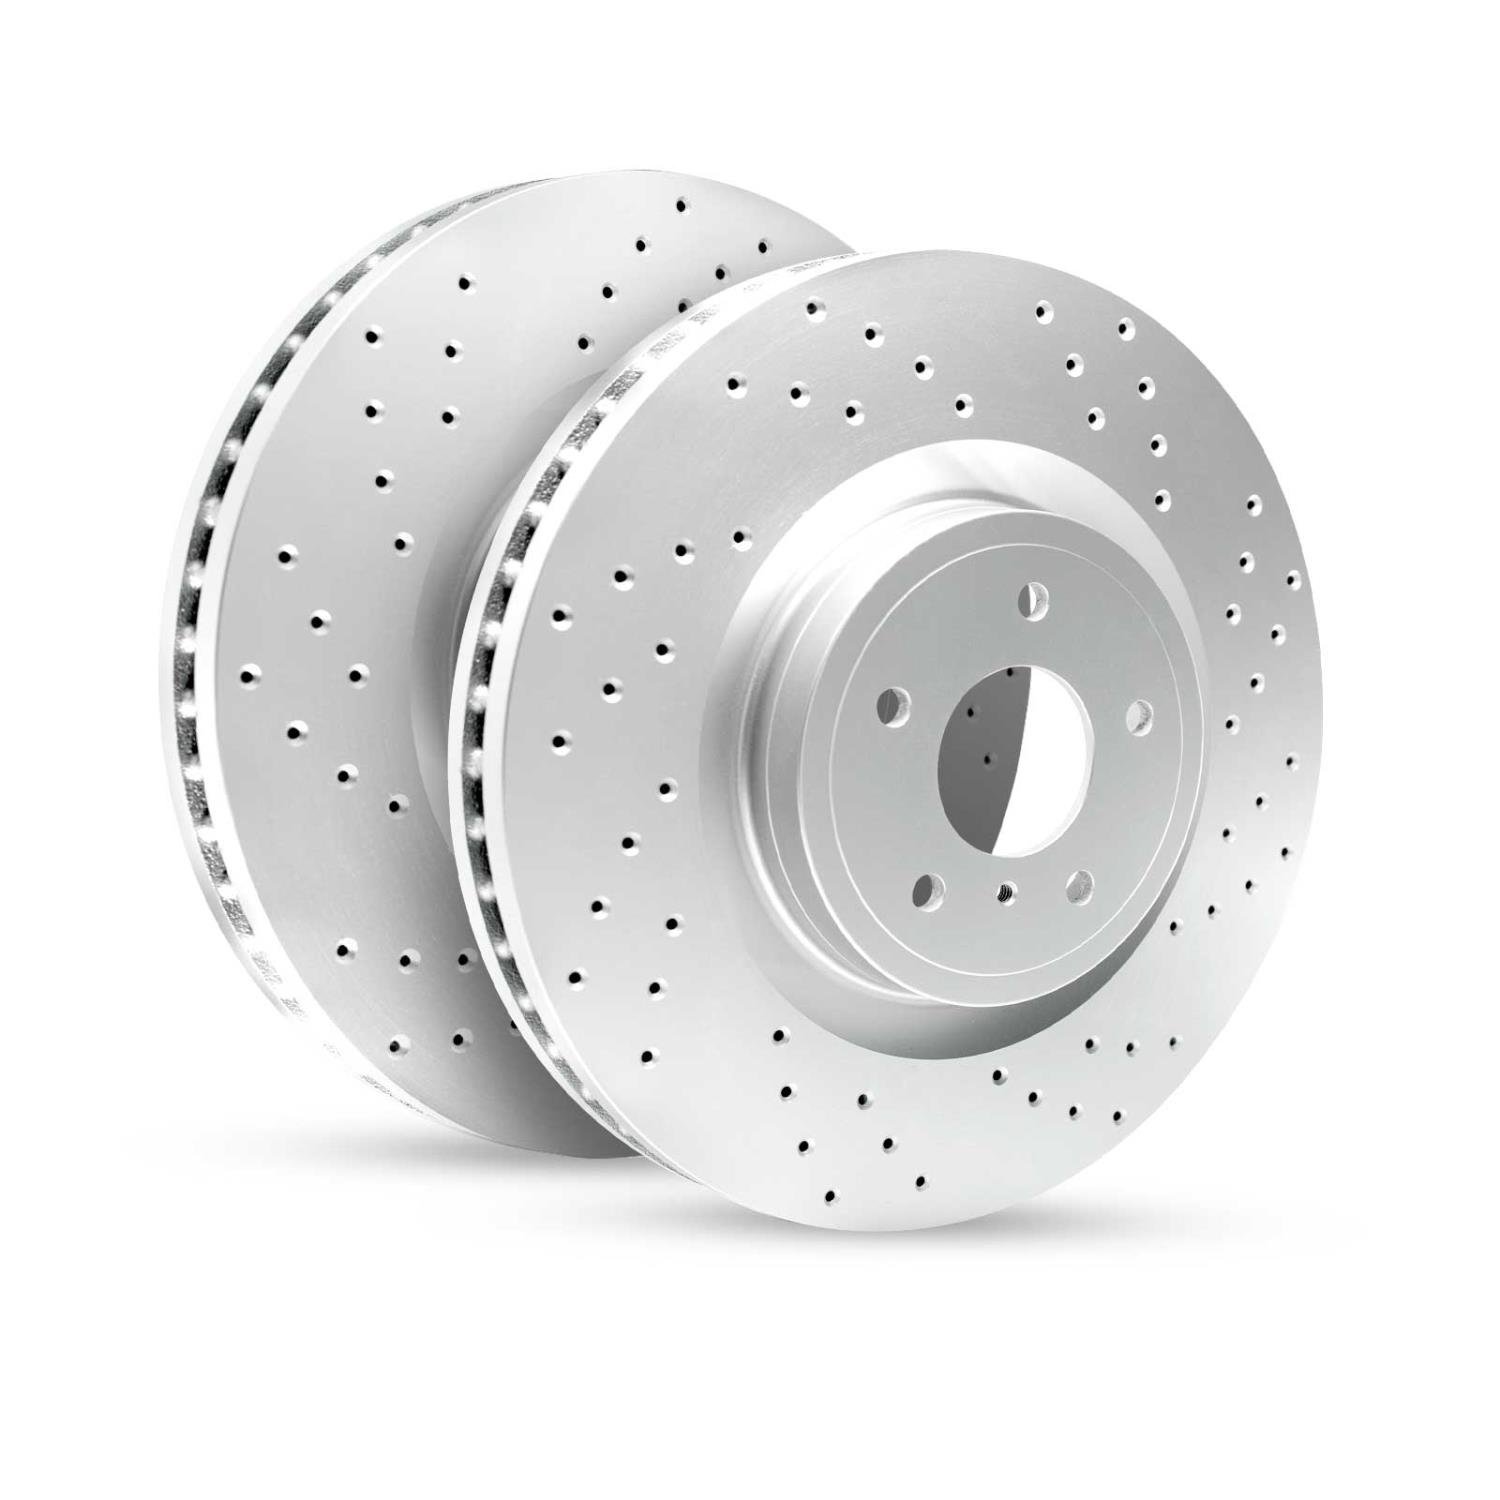 GEO-Carbon Drilled/Slotted Rotors, 1994-2001 Ford/Mazda,